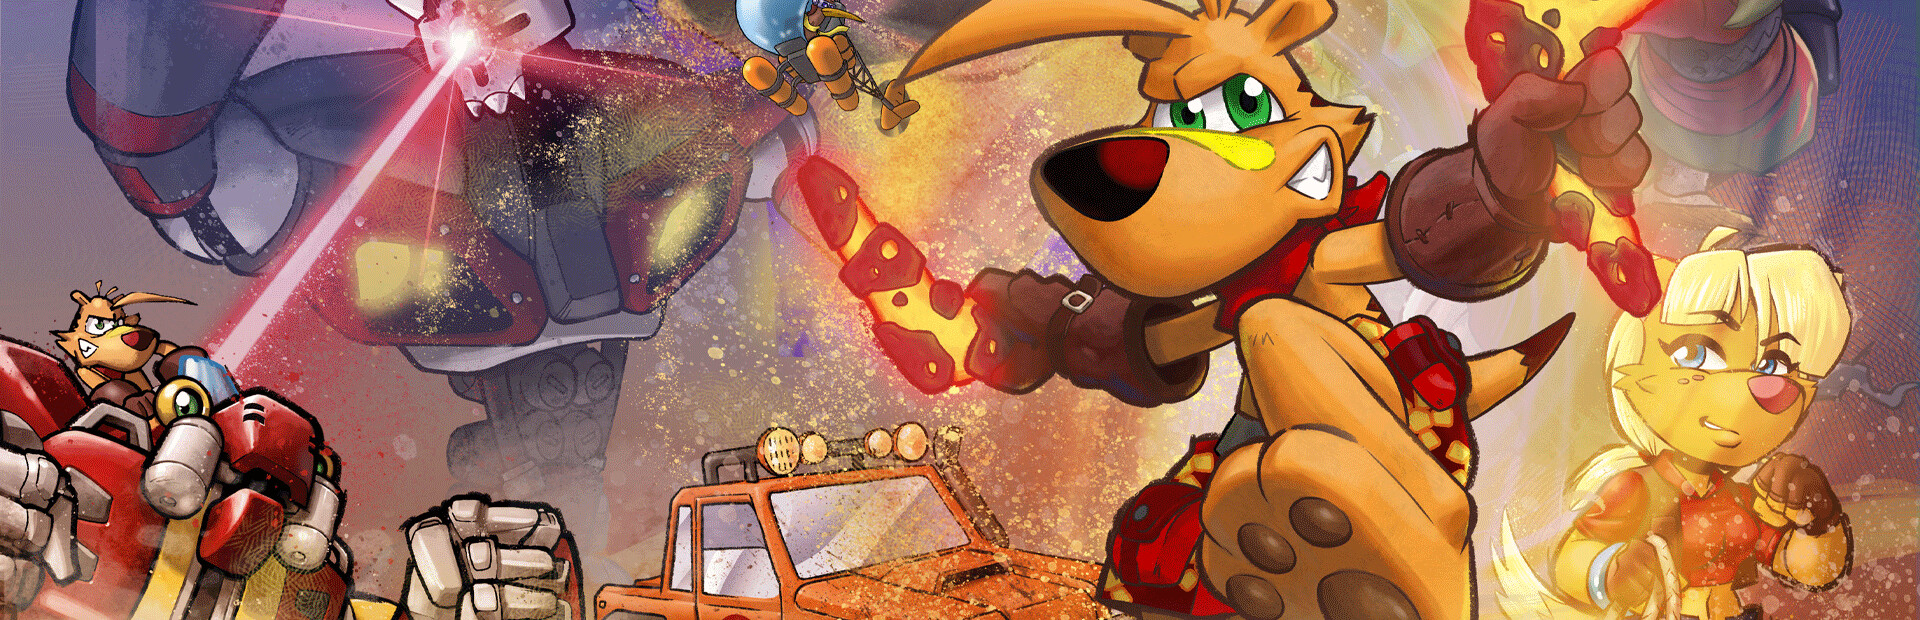 TY the Tasmanian Tiger 2 cover image